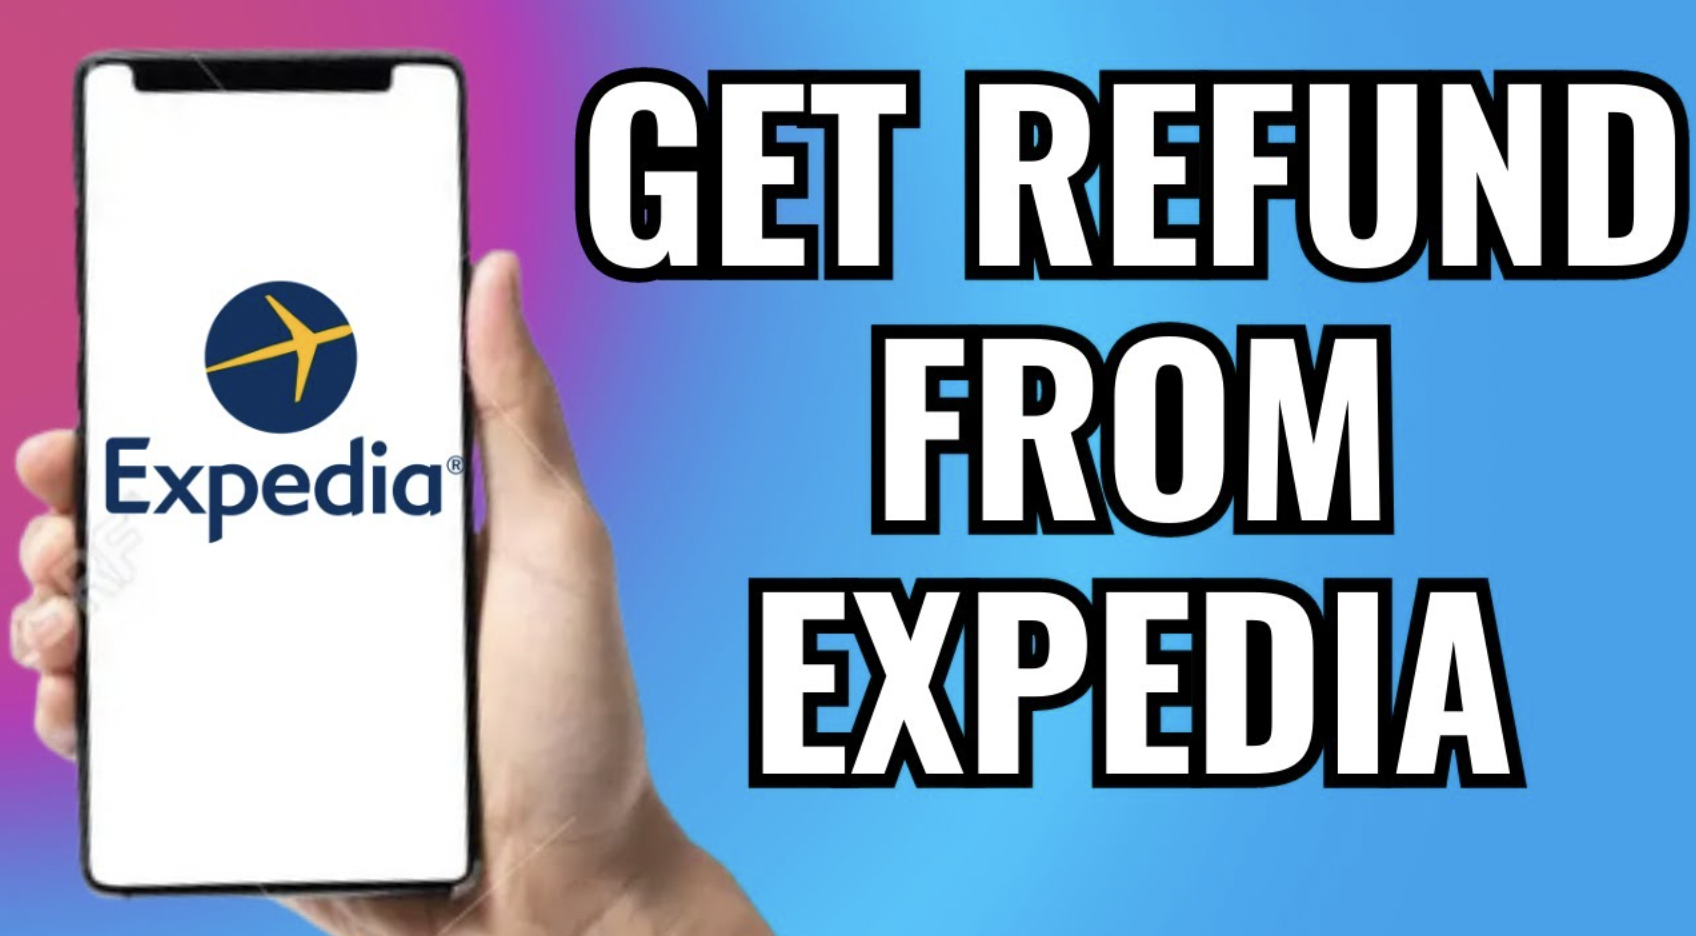 How to Get a Refund from Expedia